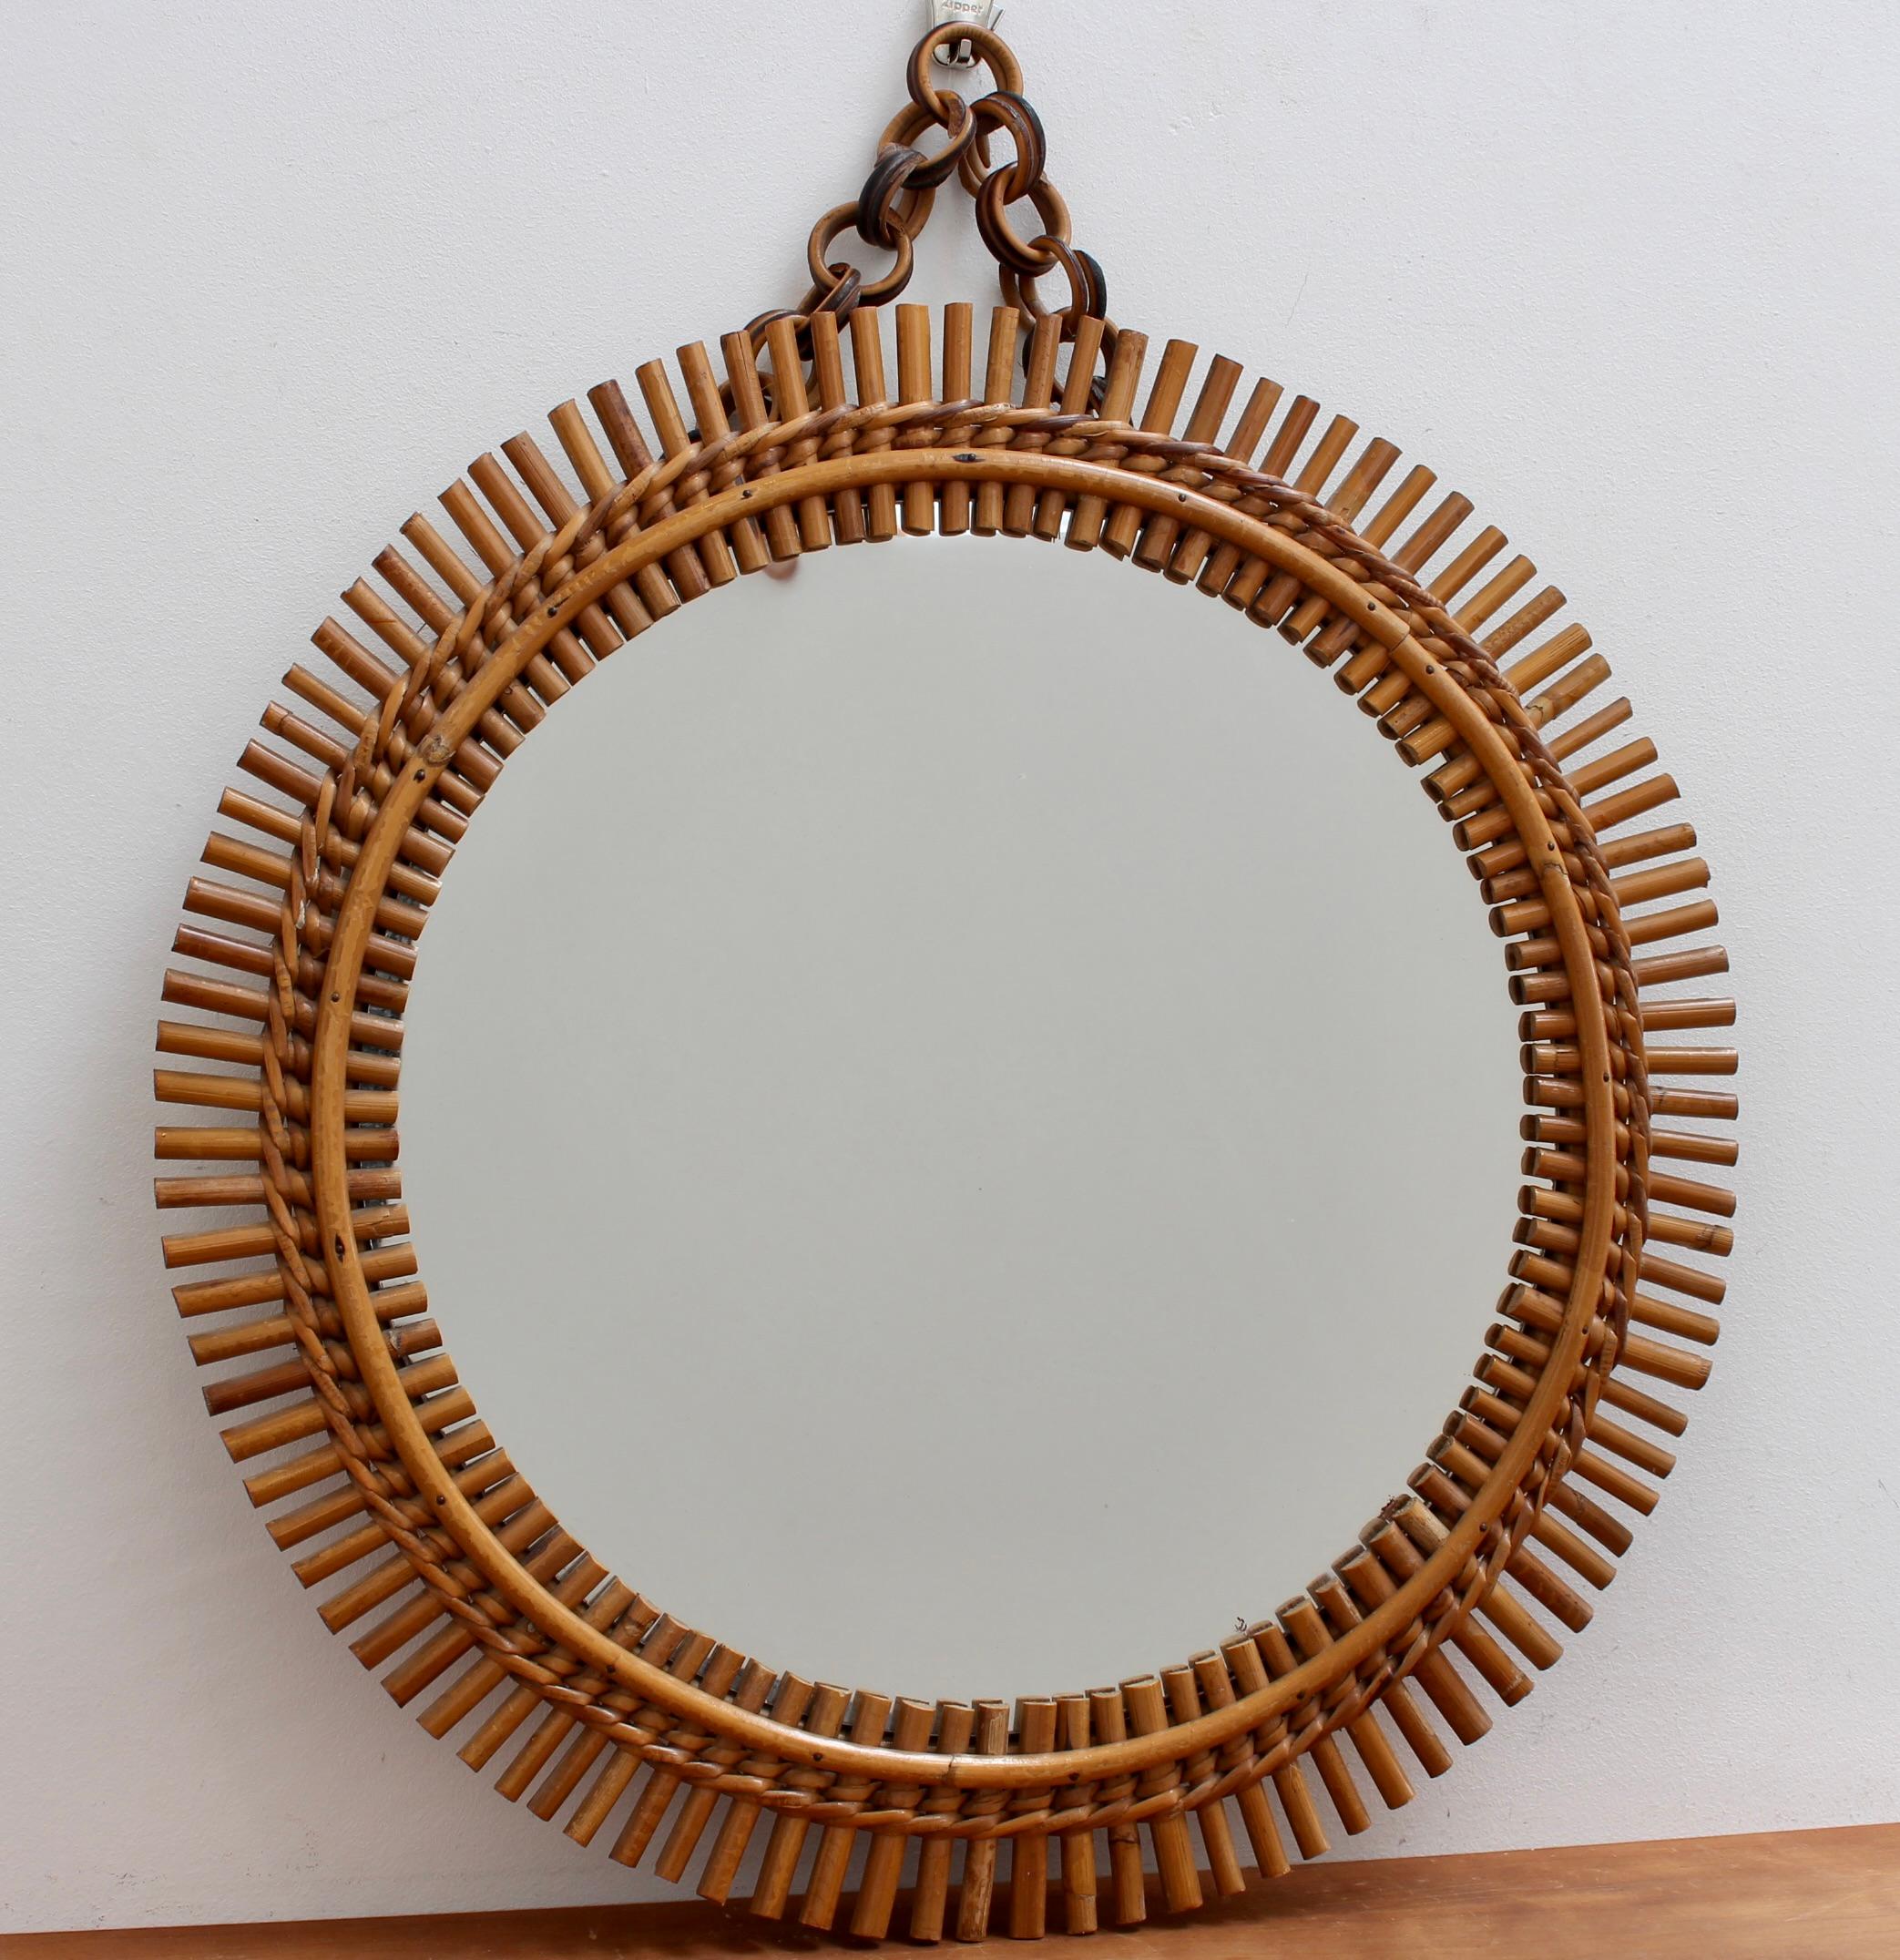 Italian vintage rattan round wall mirror with hanging chain (circa 1960s). This mirror has a very delightful shape bound together with rattan rope weave motif. The rattan hanging chain is intact and adds to its appeal. There is a characterful, aged